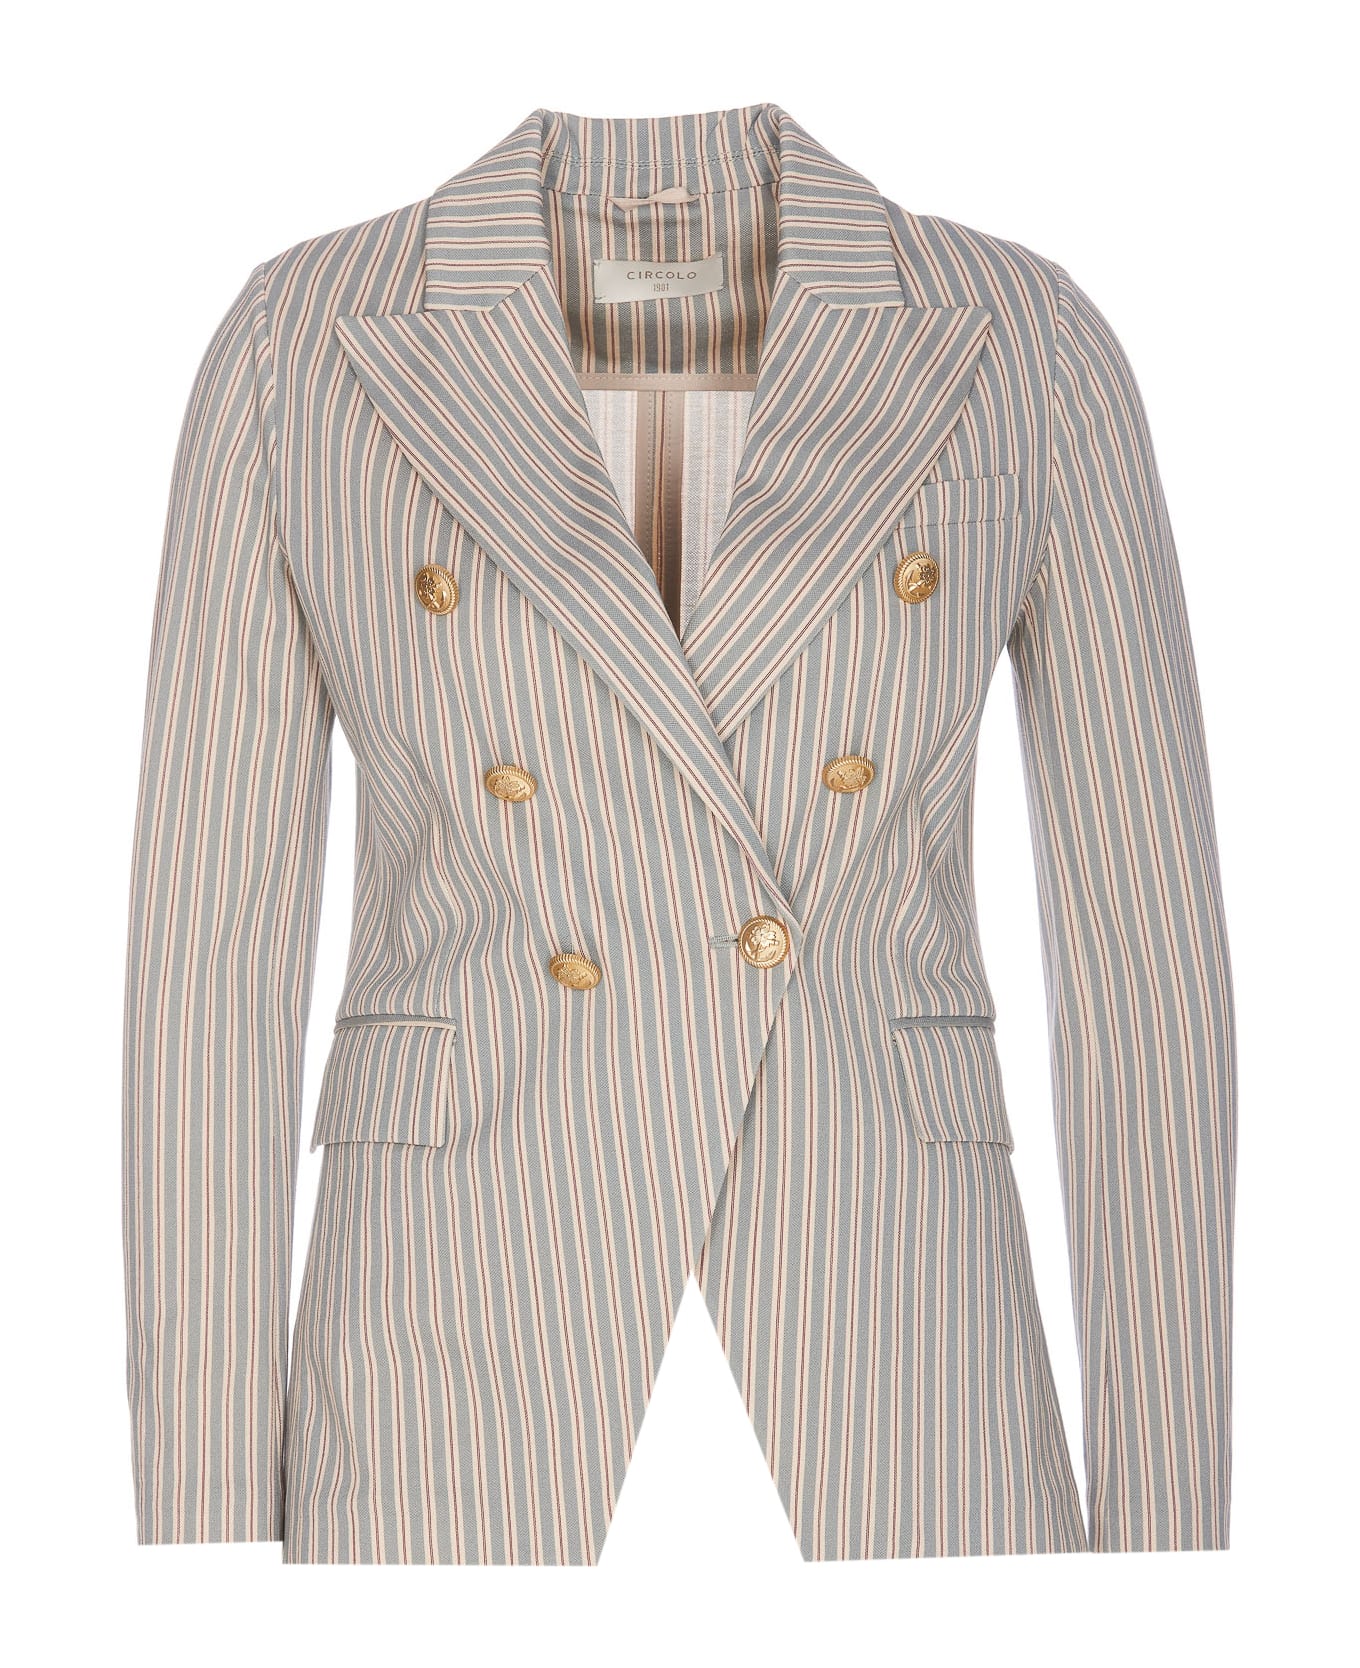 Circolo 1901 Double Breasted Buttons Jacket - MultiColour